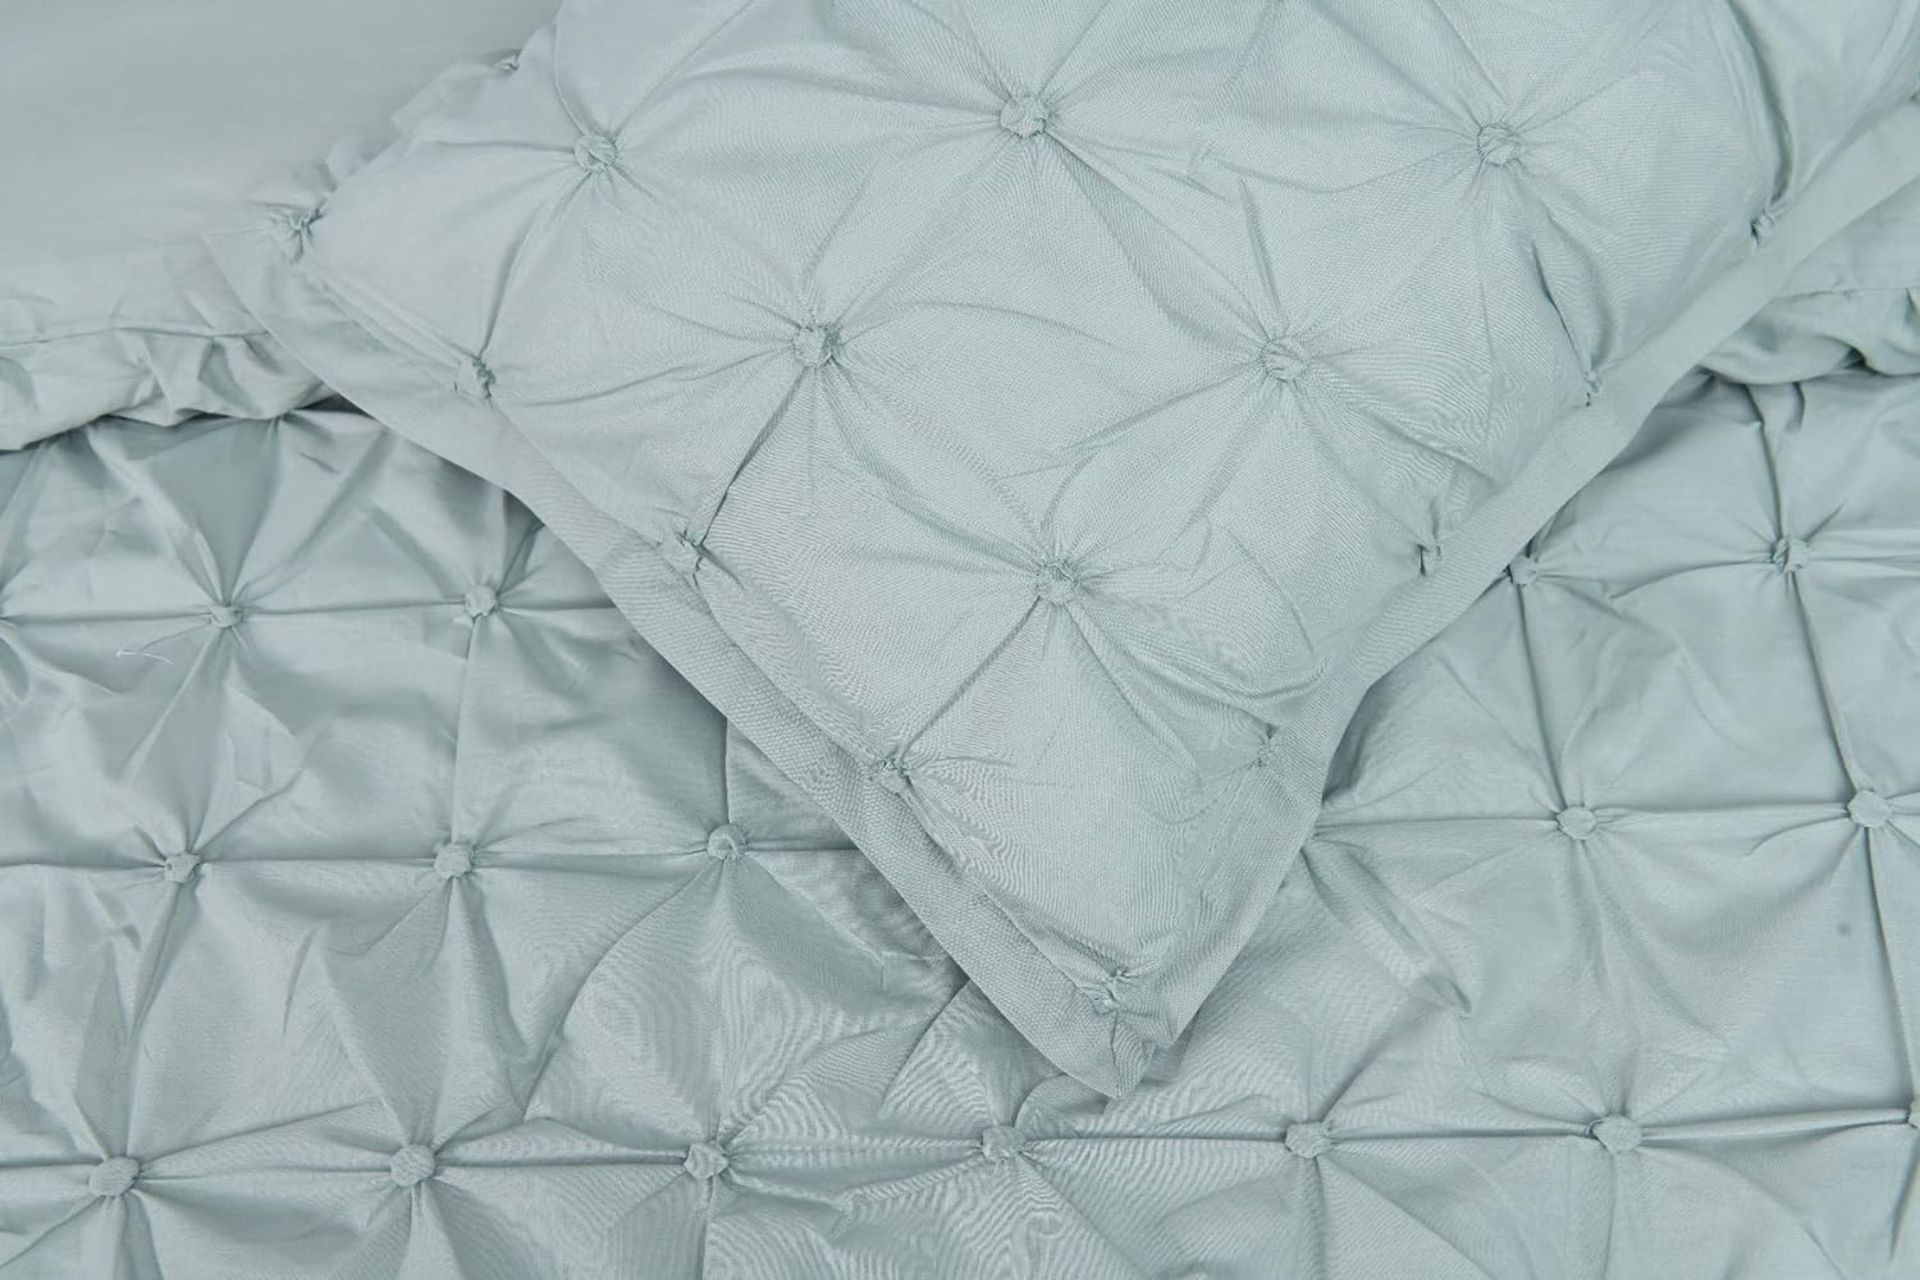 11x NEW & PACKAGED SLEEPDOWN Rouched Easy Care SINGLE Duvet Set - SAGE GREEN. RRP £22.99 EACH. (R7- - Image 6 of 7